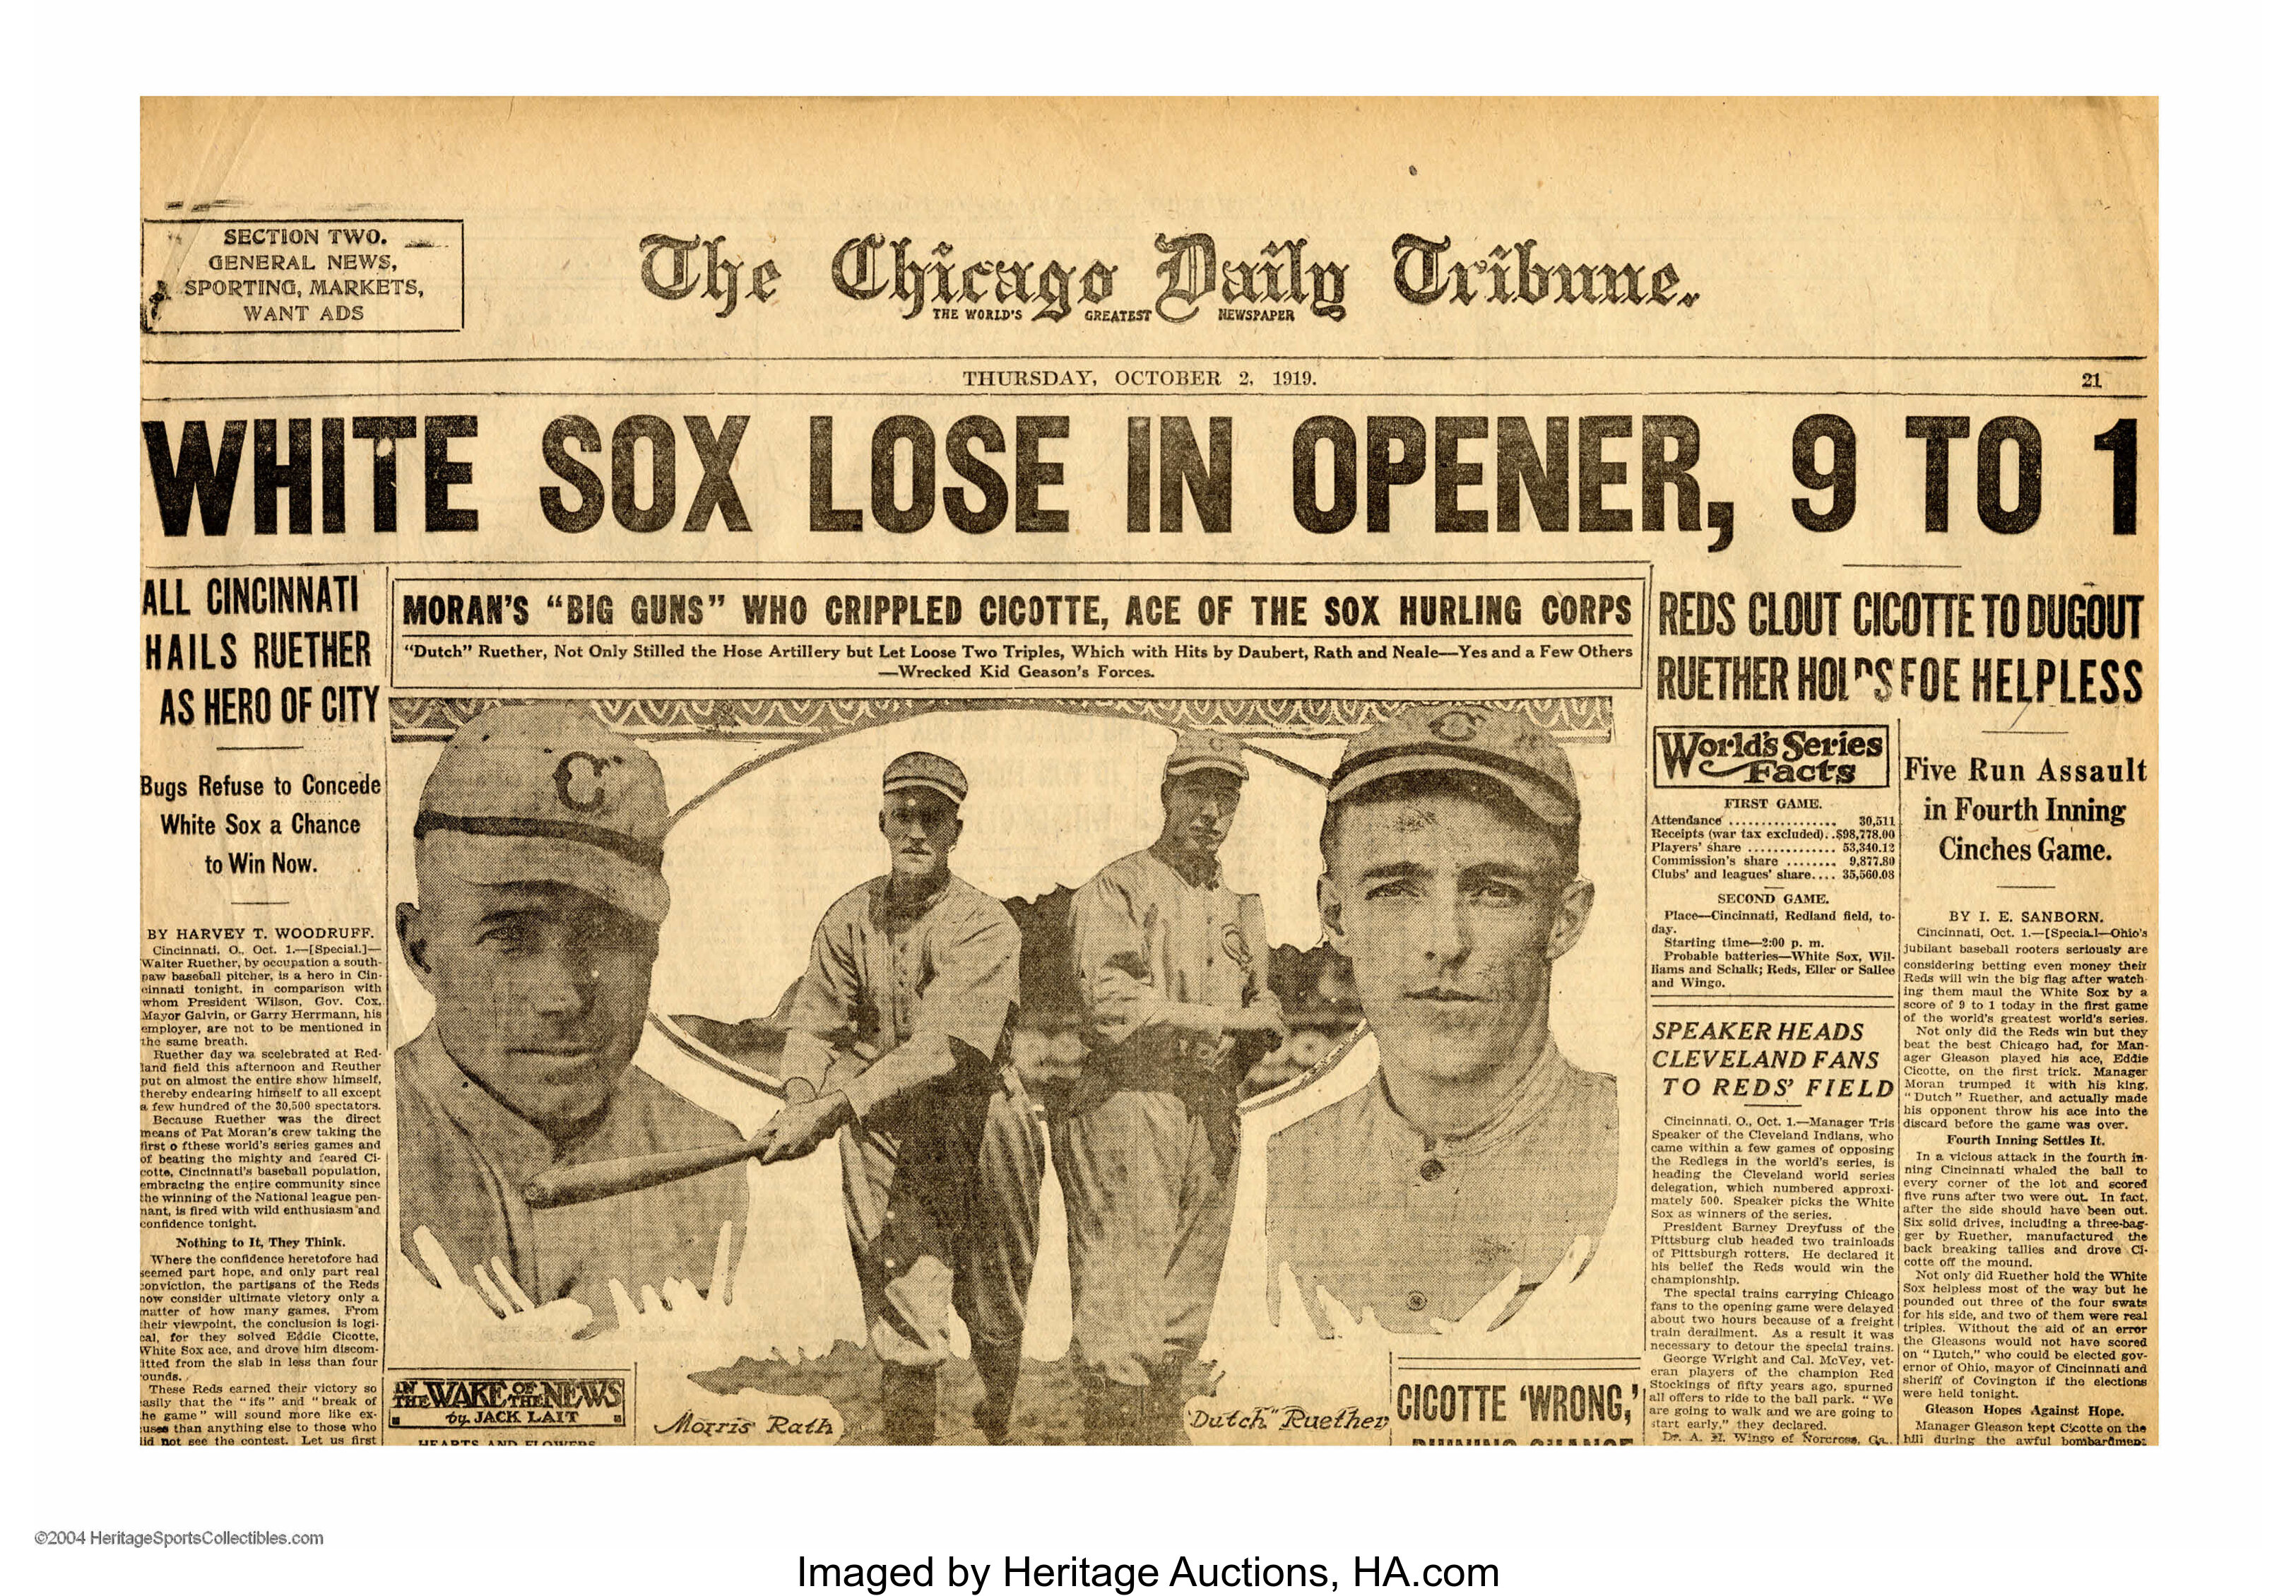 Newspapers.com - As part of the unfolding Black Sox scandal, 8 Chicago  White Sox players were indicted on September 28, 1920, on charges of  throwing the 1919 World Series. The scandal made